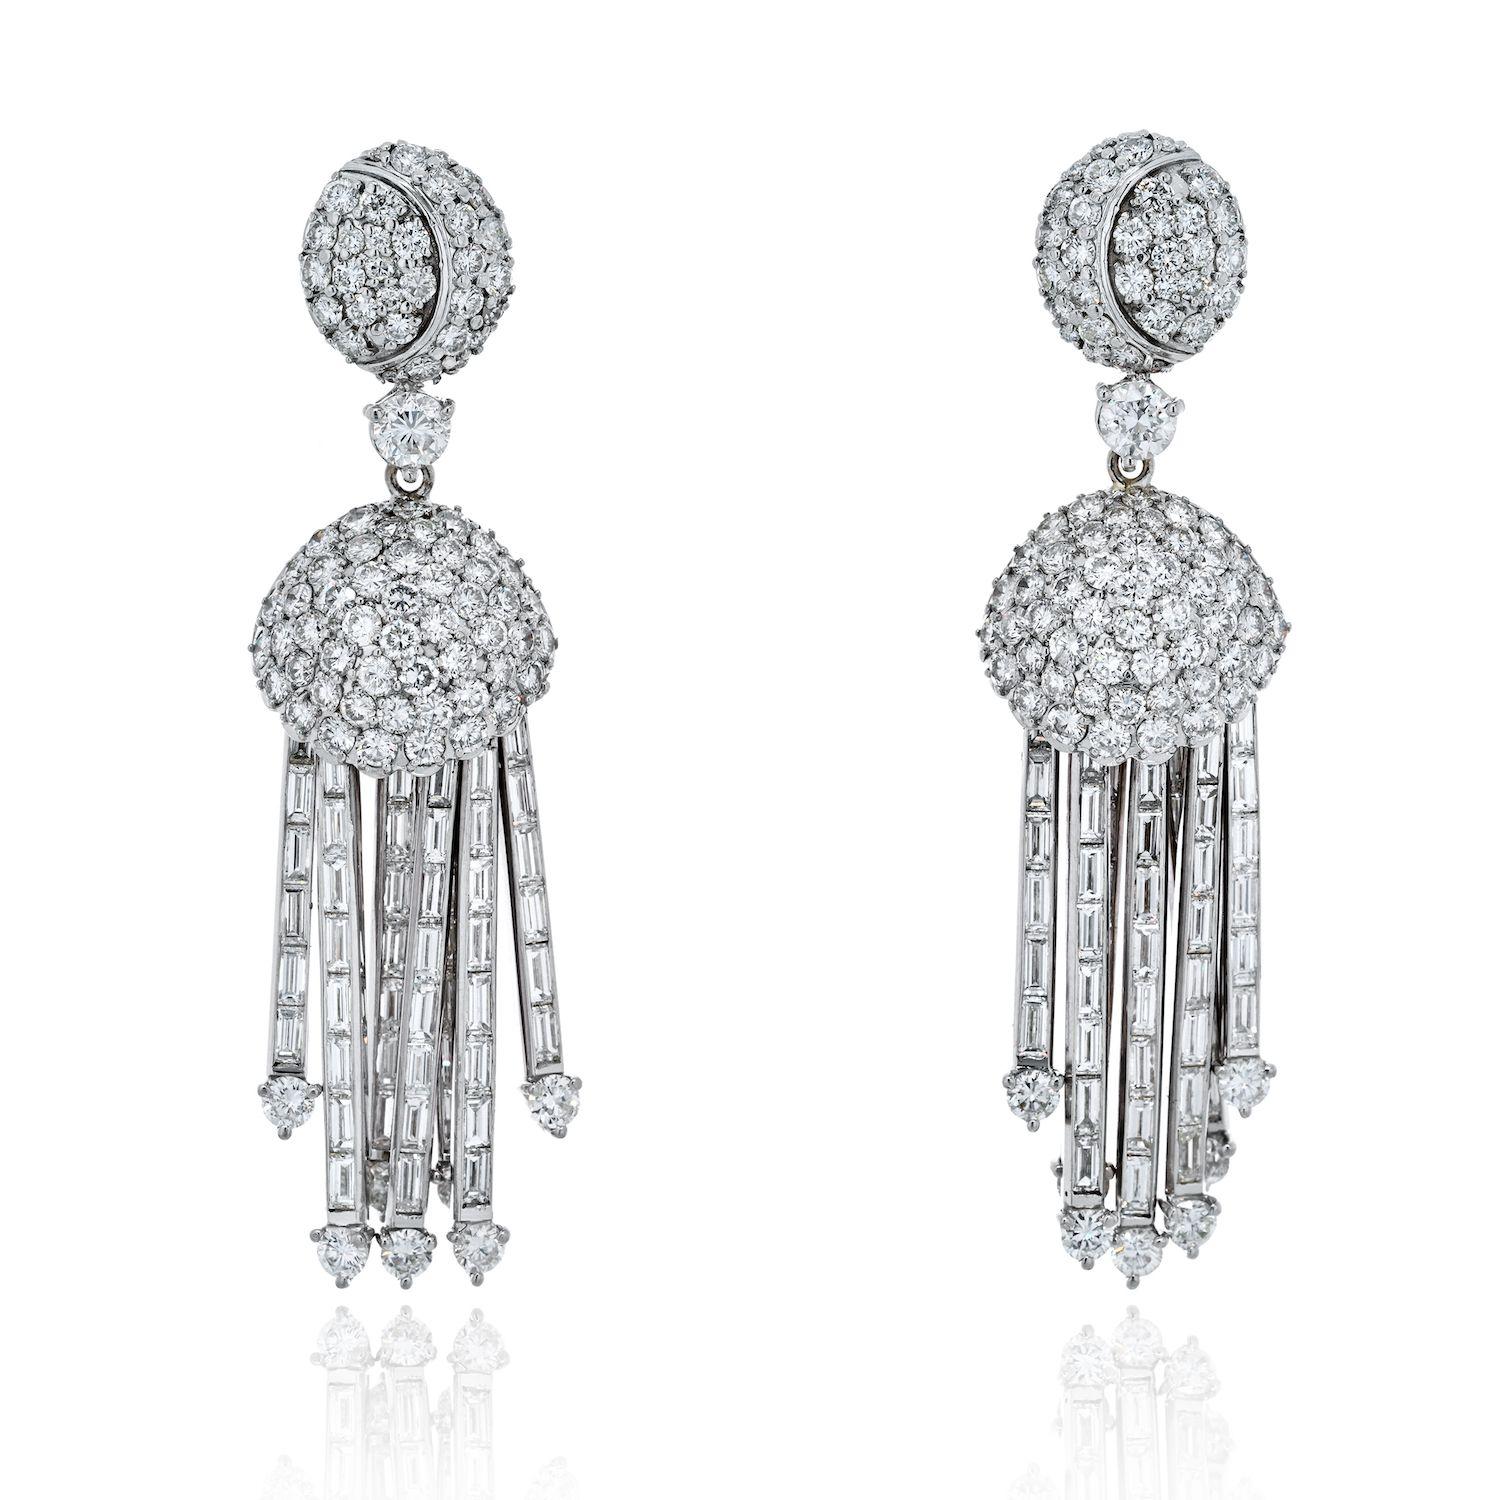 Elevate your style with these opulent 18K white gold dangling diamond earrings. These luxurious earrings are a true statement piece, boasting a remarkable 25 carats of round and baguette-cut diamonds meticulously set in a fabulous Art Deco-inspired